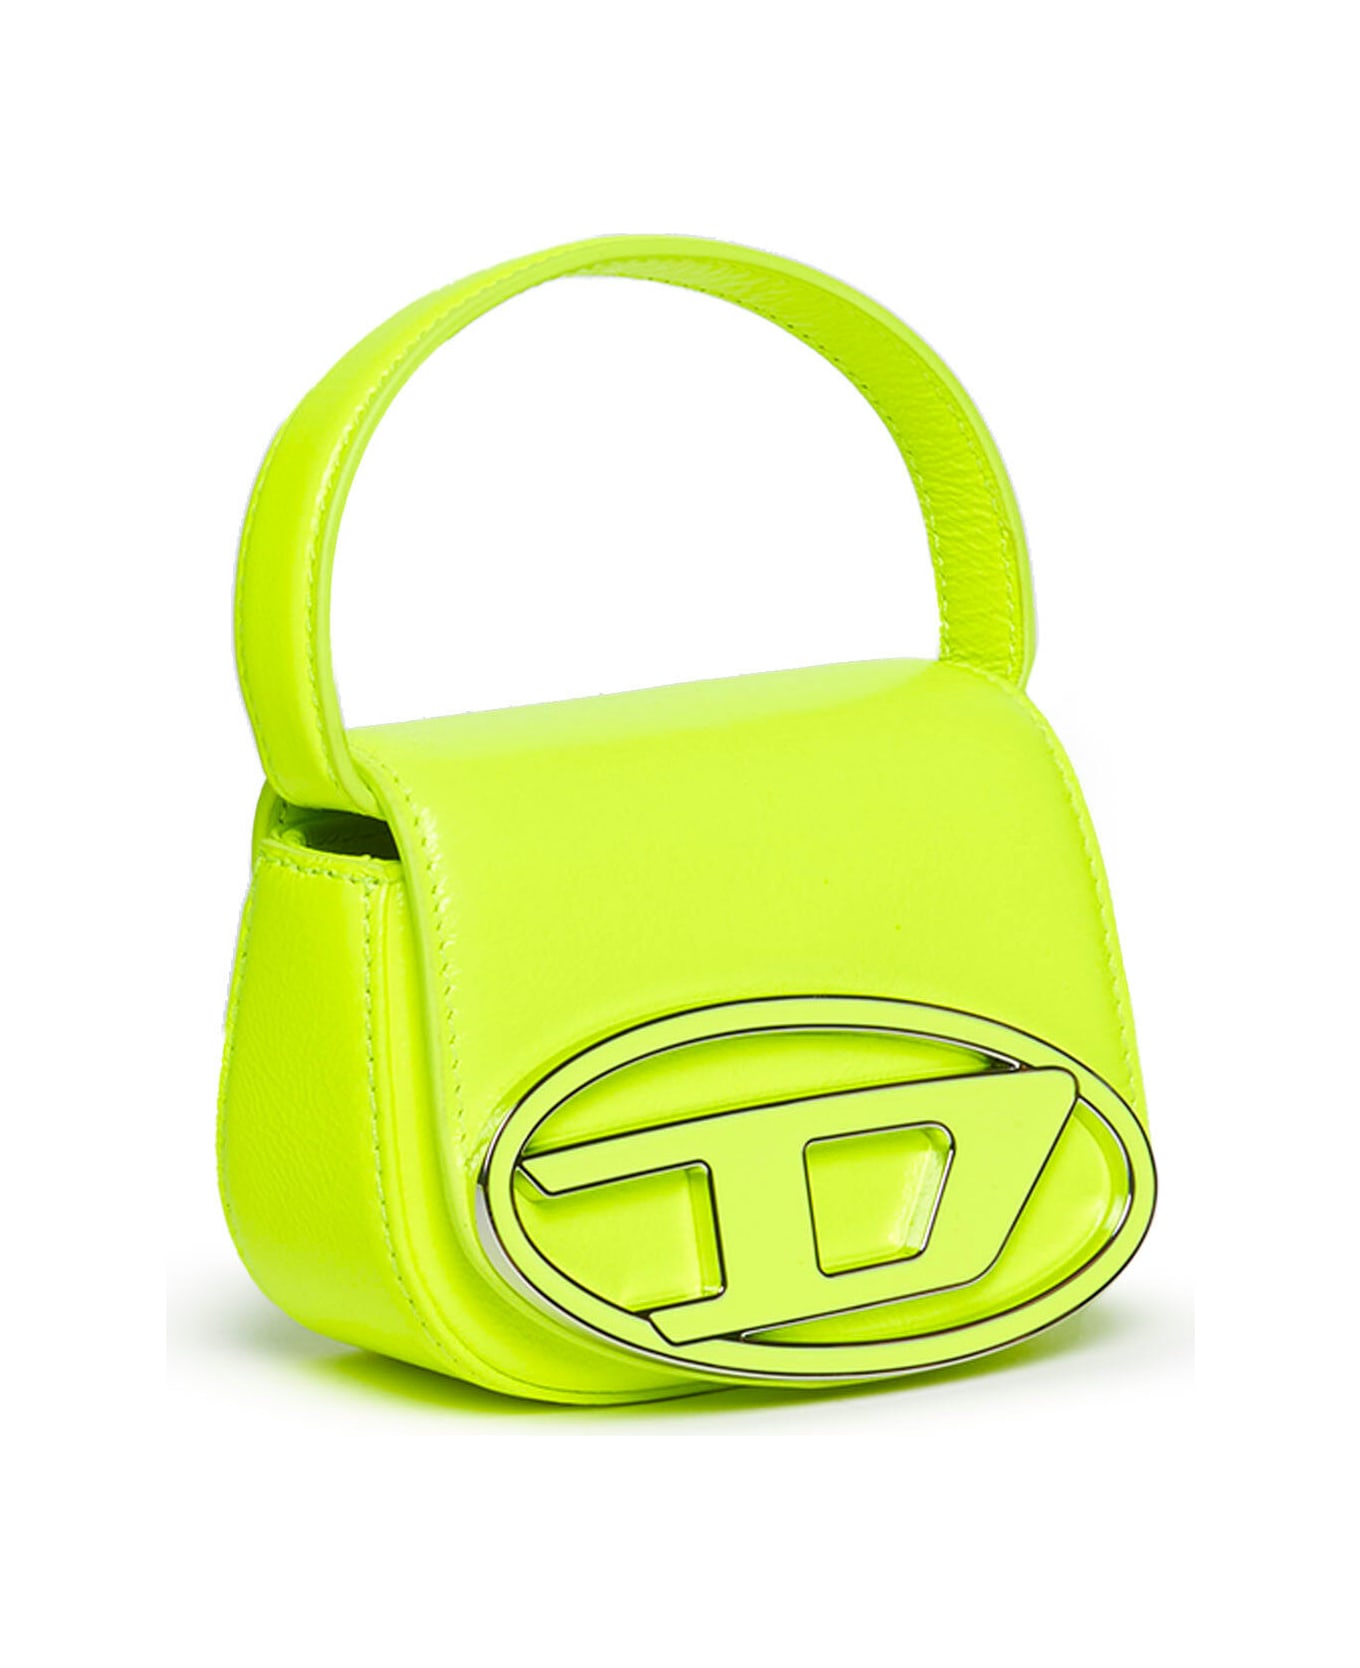 Diesel 1dr Xs Bags Diesel 1dr Xs Bag In Fluo Imitation Leather - Yellow